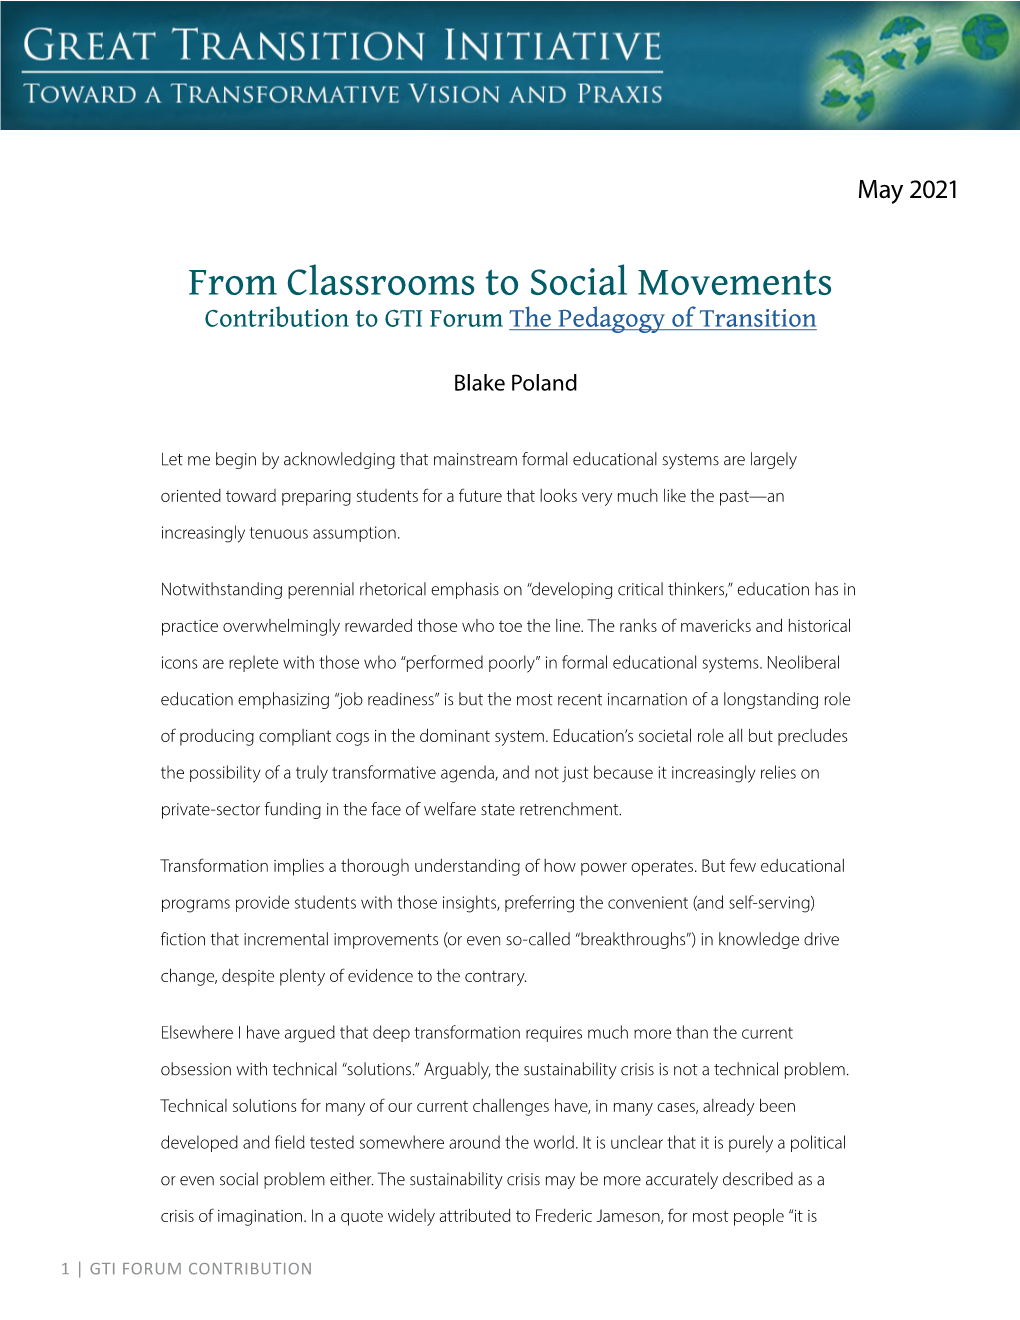 From Classrooms to Social Movements Contribution to GTI Forum the Pedagogy of Transition